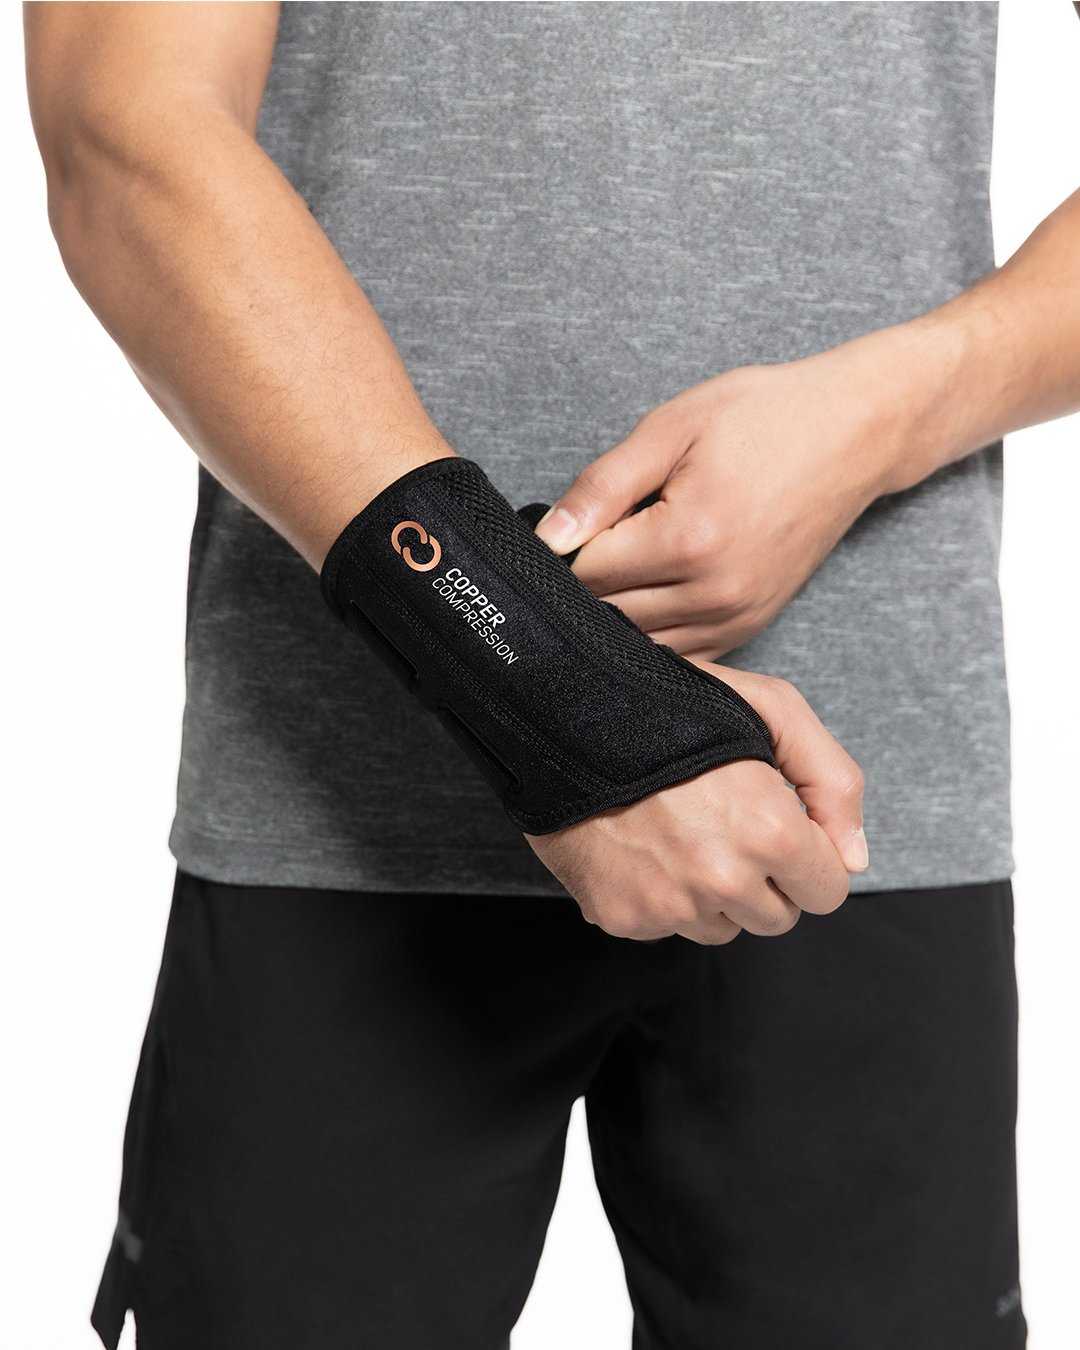 Copper Compression Wrist Brace - Copper Infused Adjustable Orthopedic  Support Splint for Pain, Ganglion Cyst, Carpal Tunnel, Arthritis,  Tendinitis, RSI, Tendinopathy for Men Women Fits Right Hand in Dubai - UAE